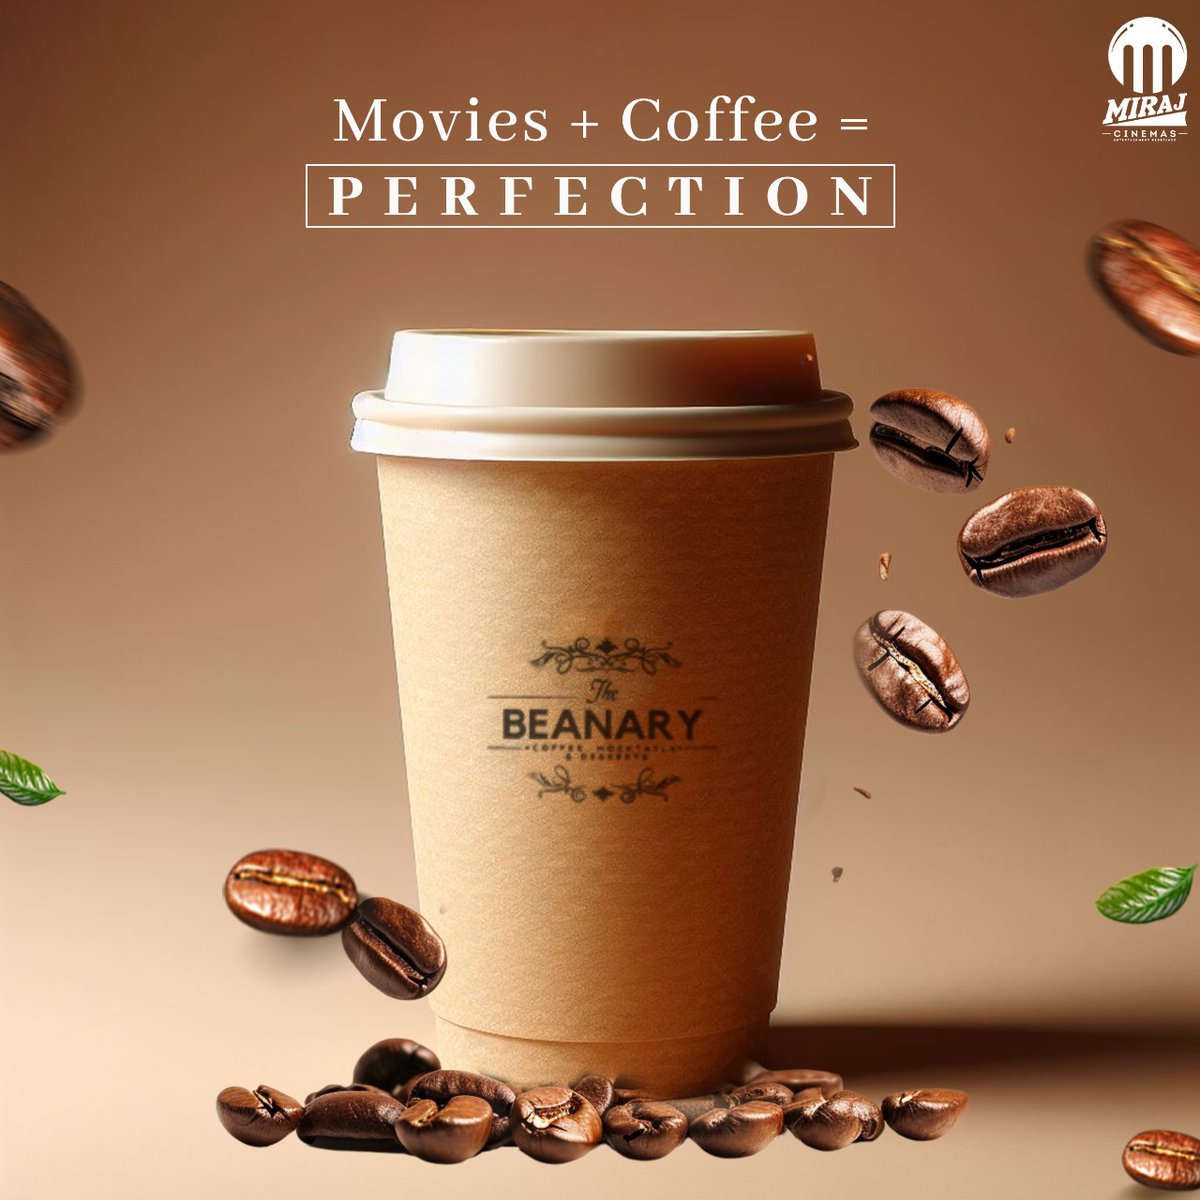 Lights, Camera, Coffee! ☕🎬 When movies and coffee come together, perfection is in every sip and every scene. Enjoy this perfect blend at #MirajCinemas.

#MirajCinemas #MovieNight #BeverageAndCinema #MirajMovies #BigScreenMagic #CoffeeLovers #Caffeine #Beanary #PerfectDate